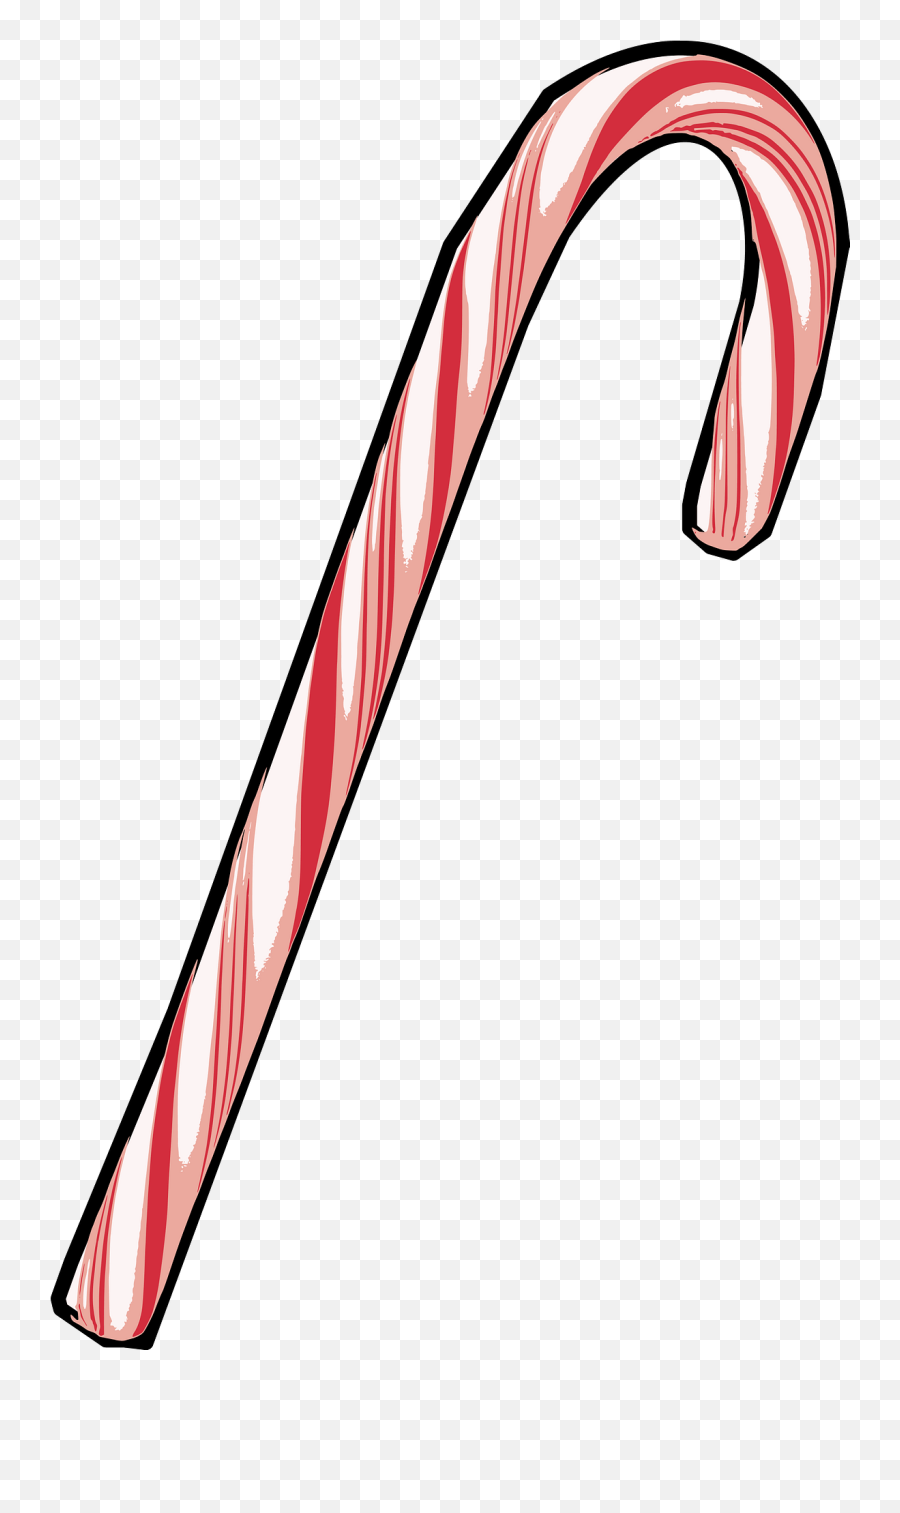 Red And White Candy Cane Clipart Free Download Transparent - Solid Emoji,Candy Cane Transparent